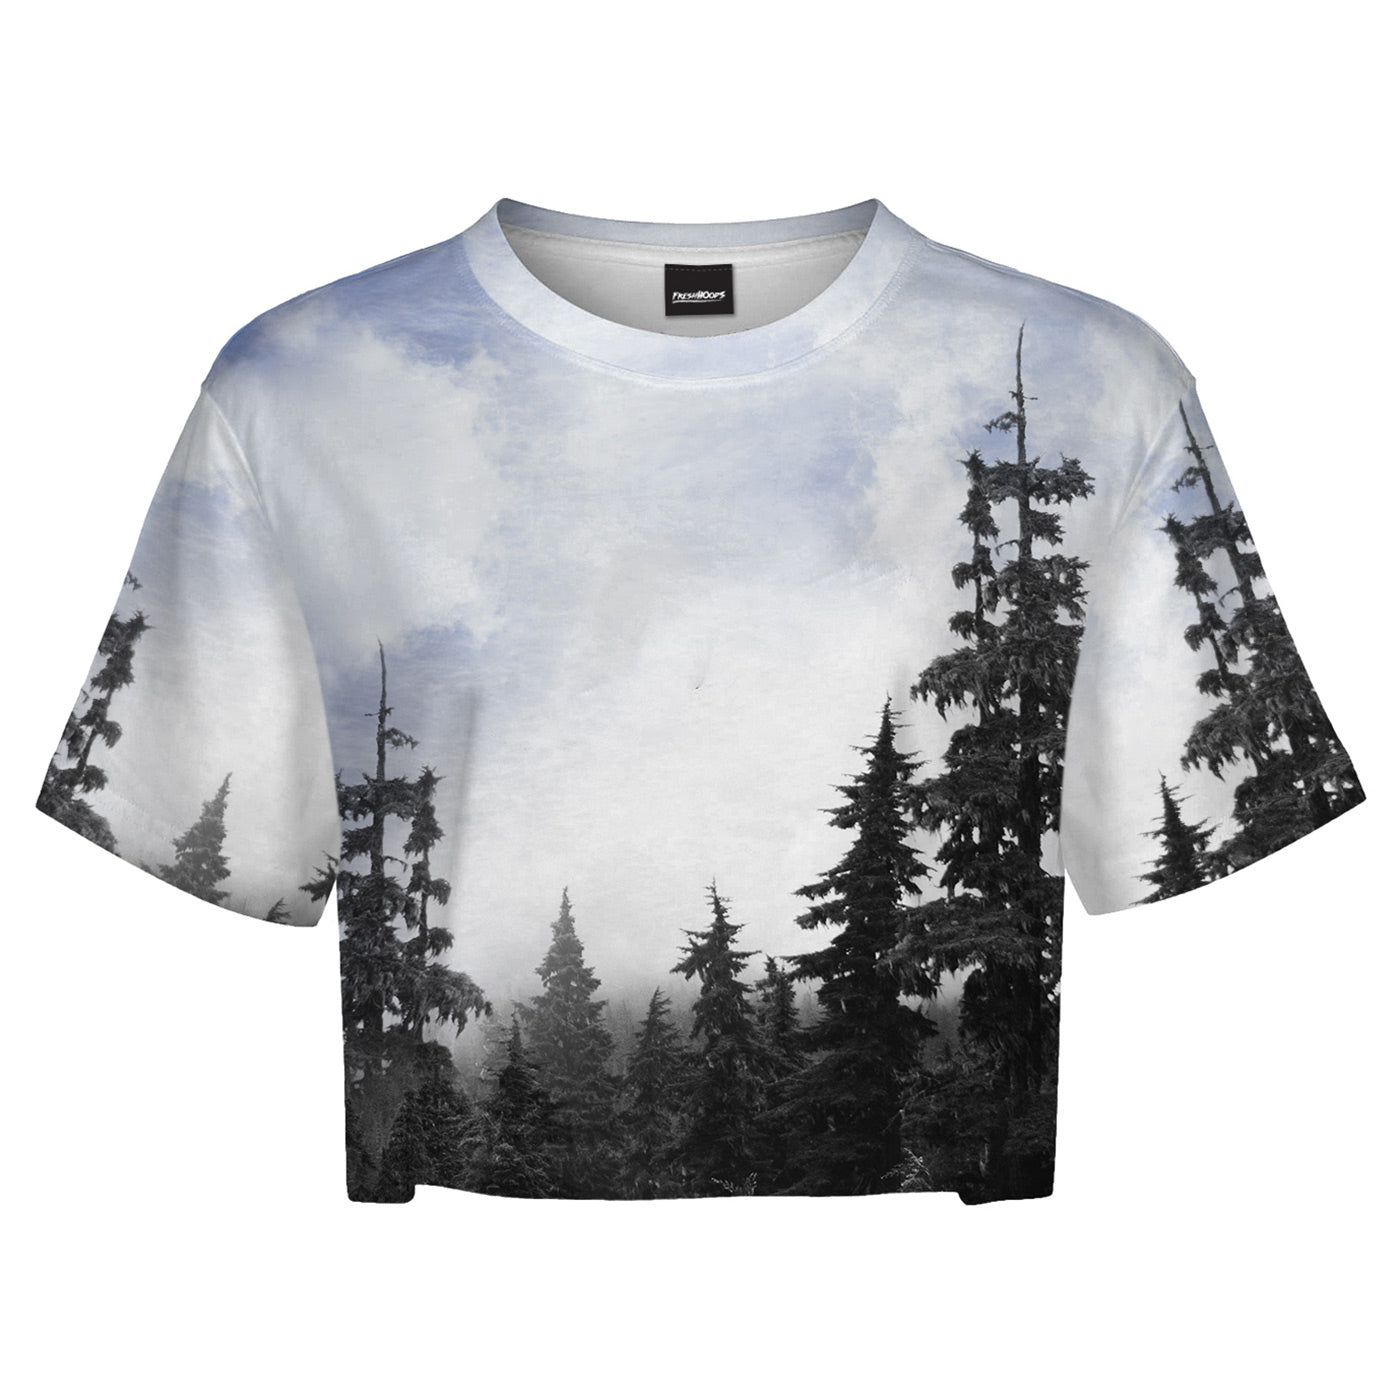 Chilly Morning Unisex Crop Top